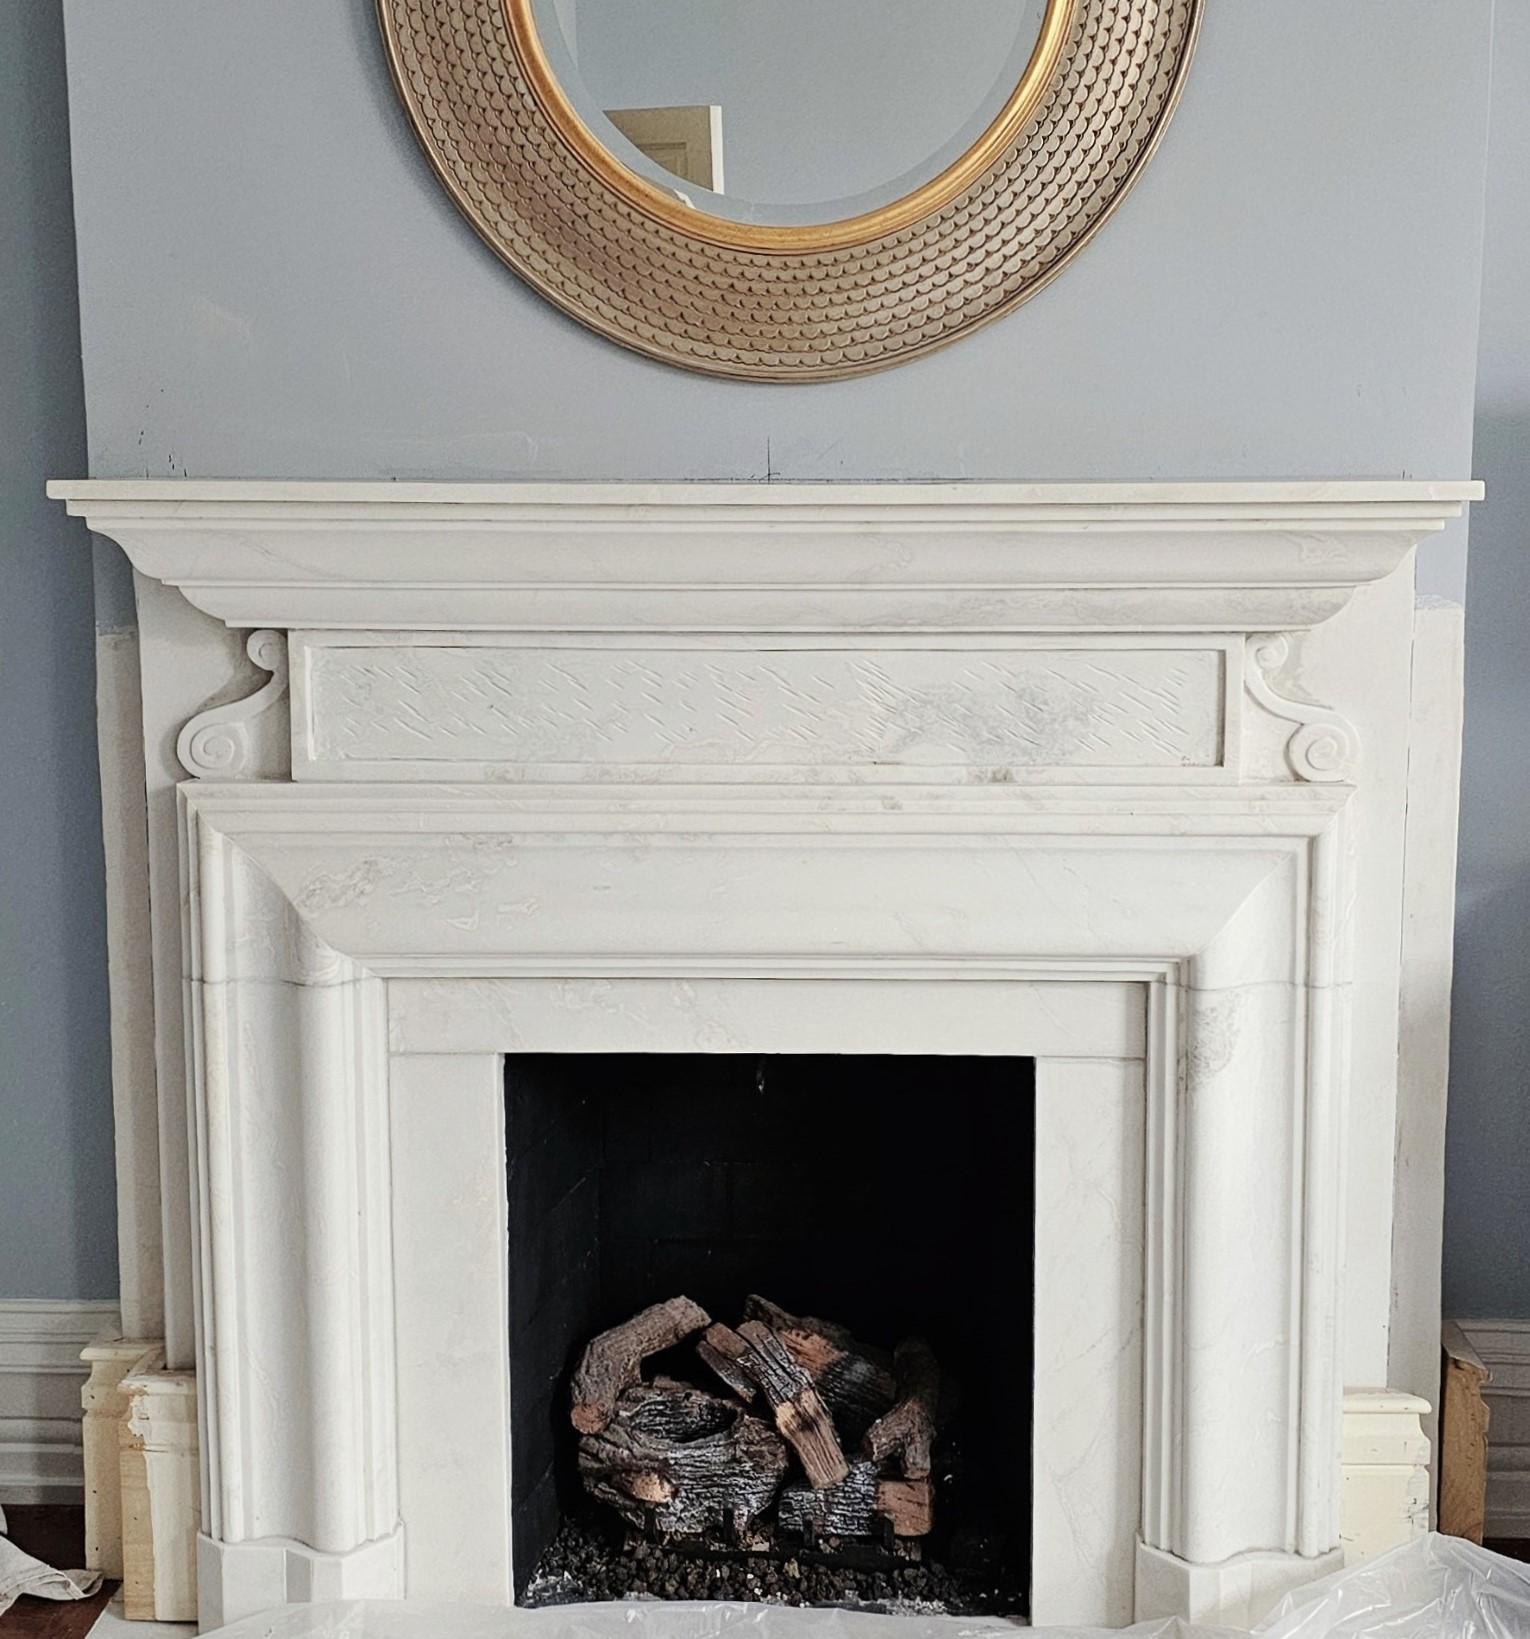 Our Jacobean stone fireplace is named after the early 17th century English design period it evokes.  It features a classic Bolection-style molding throughout the legs and first lintel piece.  In addition to the traditional Bolection curve, the